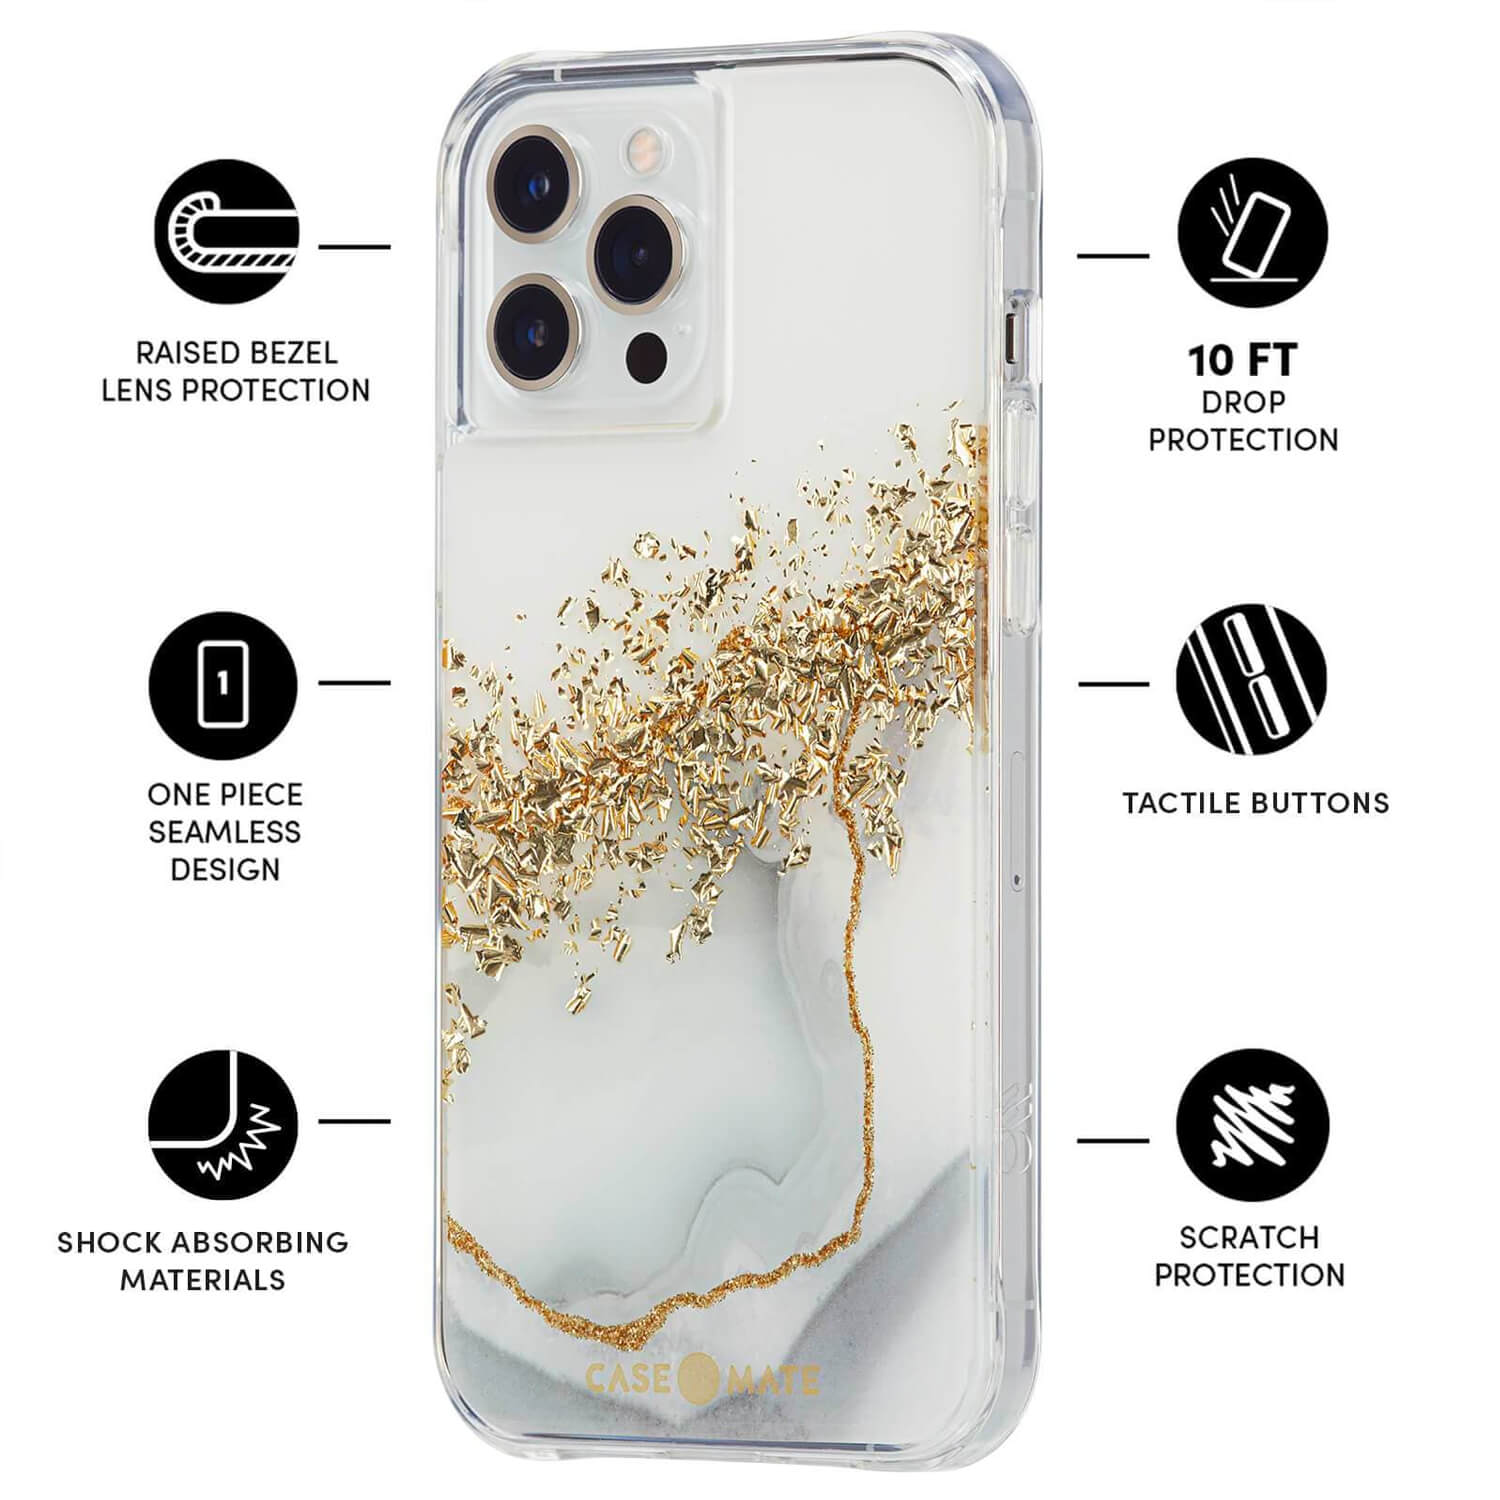 Case-Mate iPhone 13 Case Karat Marble Antimicrobial